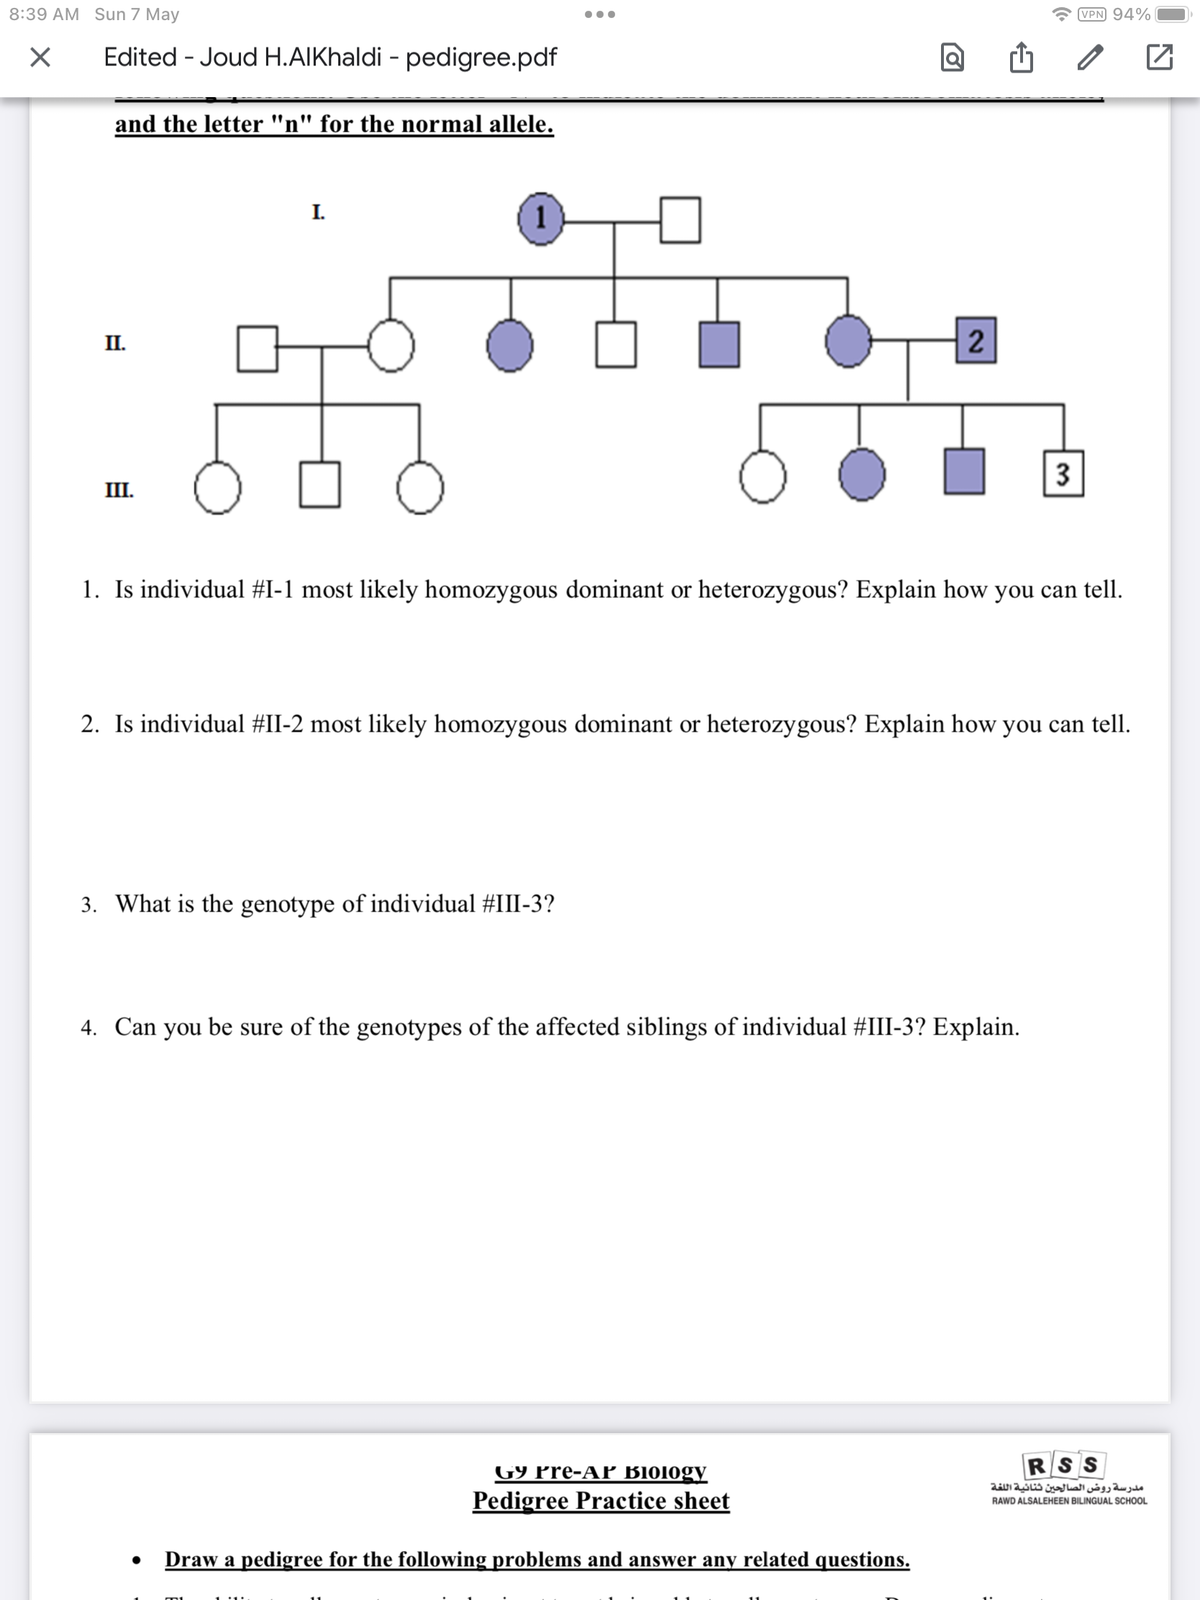 8:39 AM Sun 7 May
X
Edited - Joud H.AlKhaldi - pedigree.pdf
and the letter "n" for the normal allele.
II.
III.
I.
1
3. What is the genotype of individual #III-3?
loj
2
1. Is individual #I-1 most likely homozygous dominant or heterozygous? Explain how you can tell.
G9 Pre-AP B1010gy
Pedigree Practice sheet
2. Is individual #II-2 most likely homozygous dominant or heterozygous? Explain how you can tell.
4. Can you be sure of the genotypes of the affected siblings of individual #III-3? Explain.
● Draw a pedigree for the following problems and answer any related questions.
3
VPN 94%
RSS
مدرسة روض الصالحين ثنائية اللغة
RAWD ALSALEHEEN BILINGUAL SCHOOL